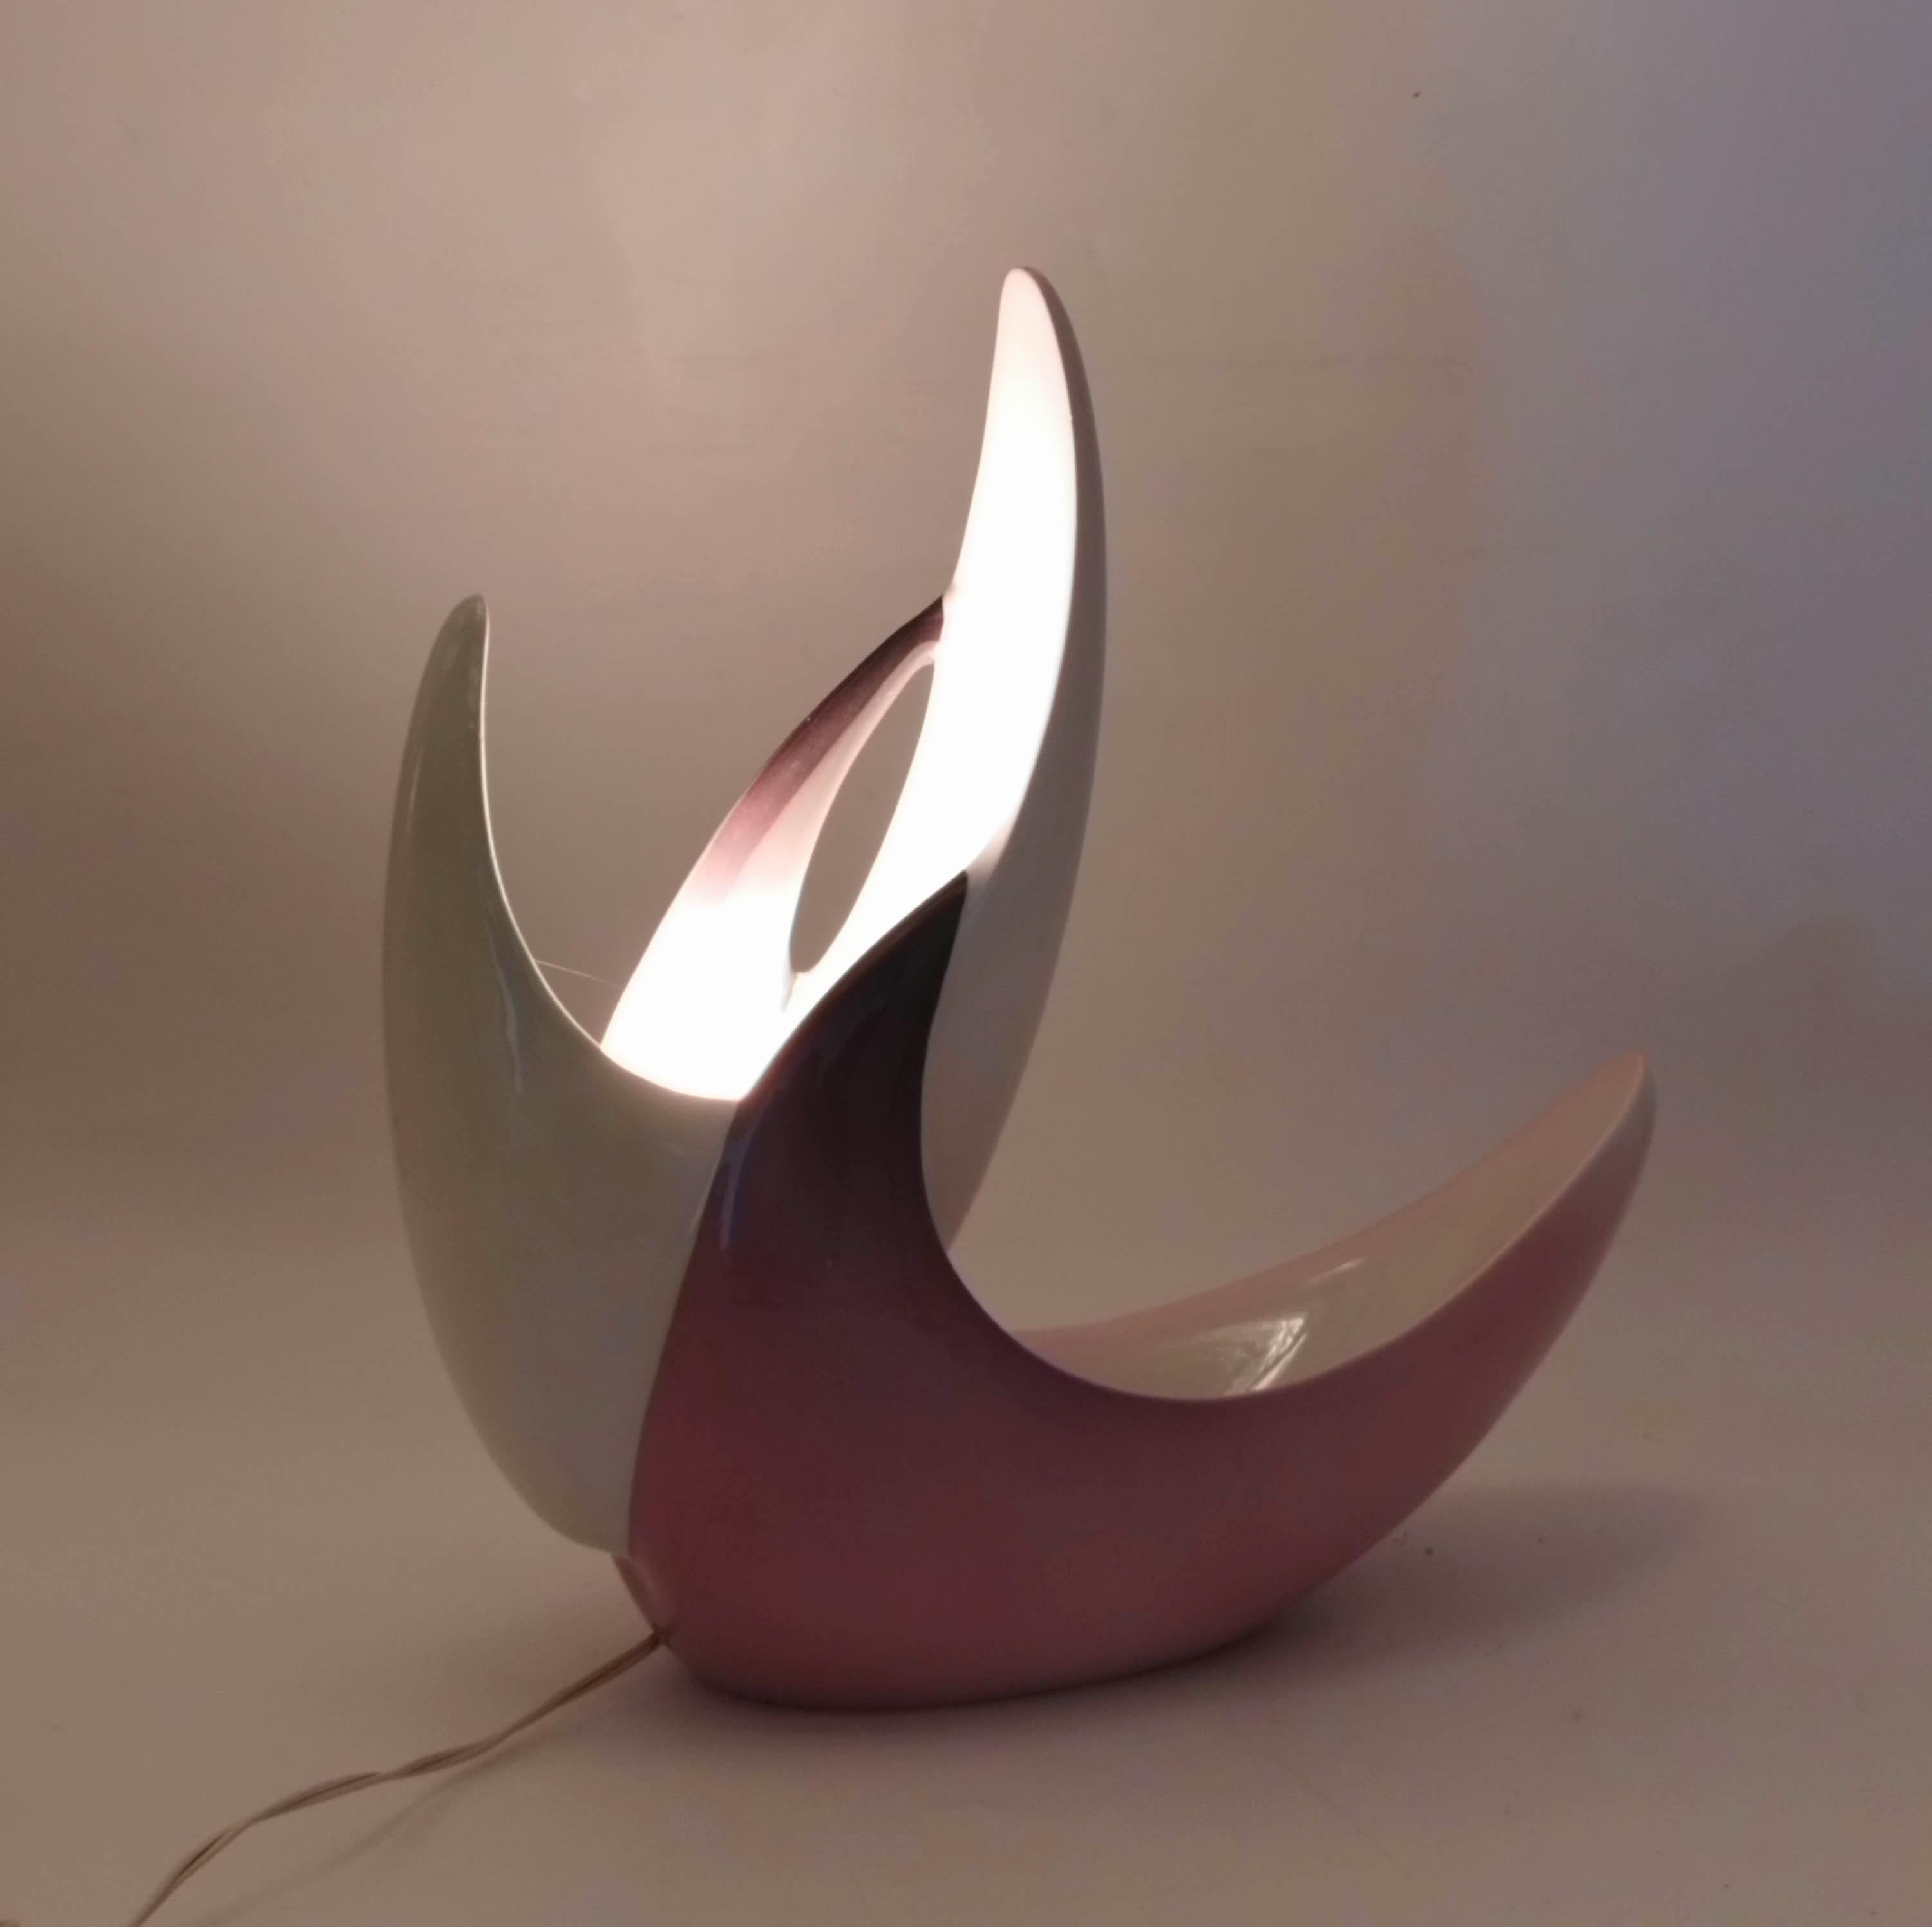 Mario Brunetti for Ariele Torino Ceramic Table Lamp N.174, Italy, 1970 For Sale 1